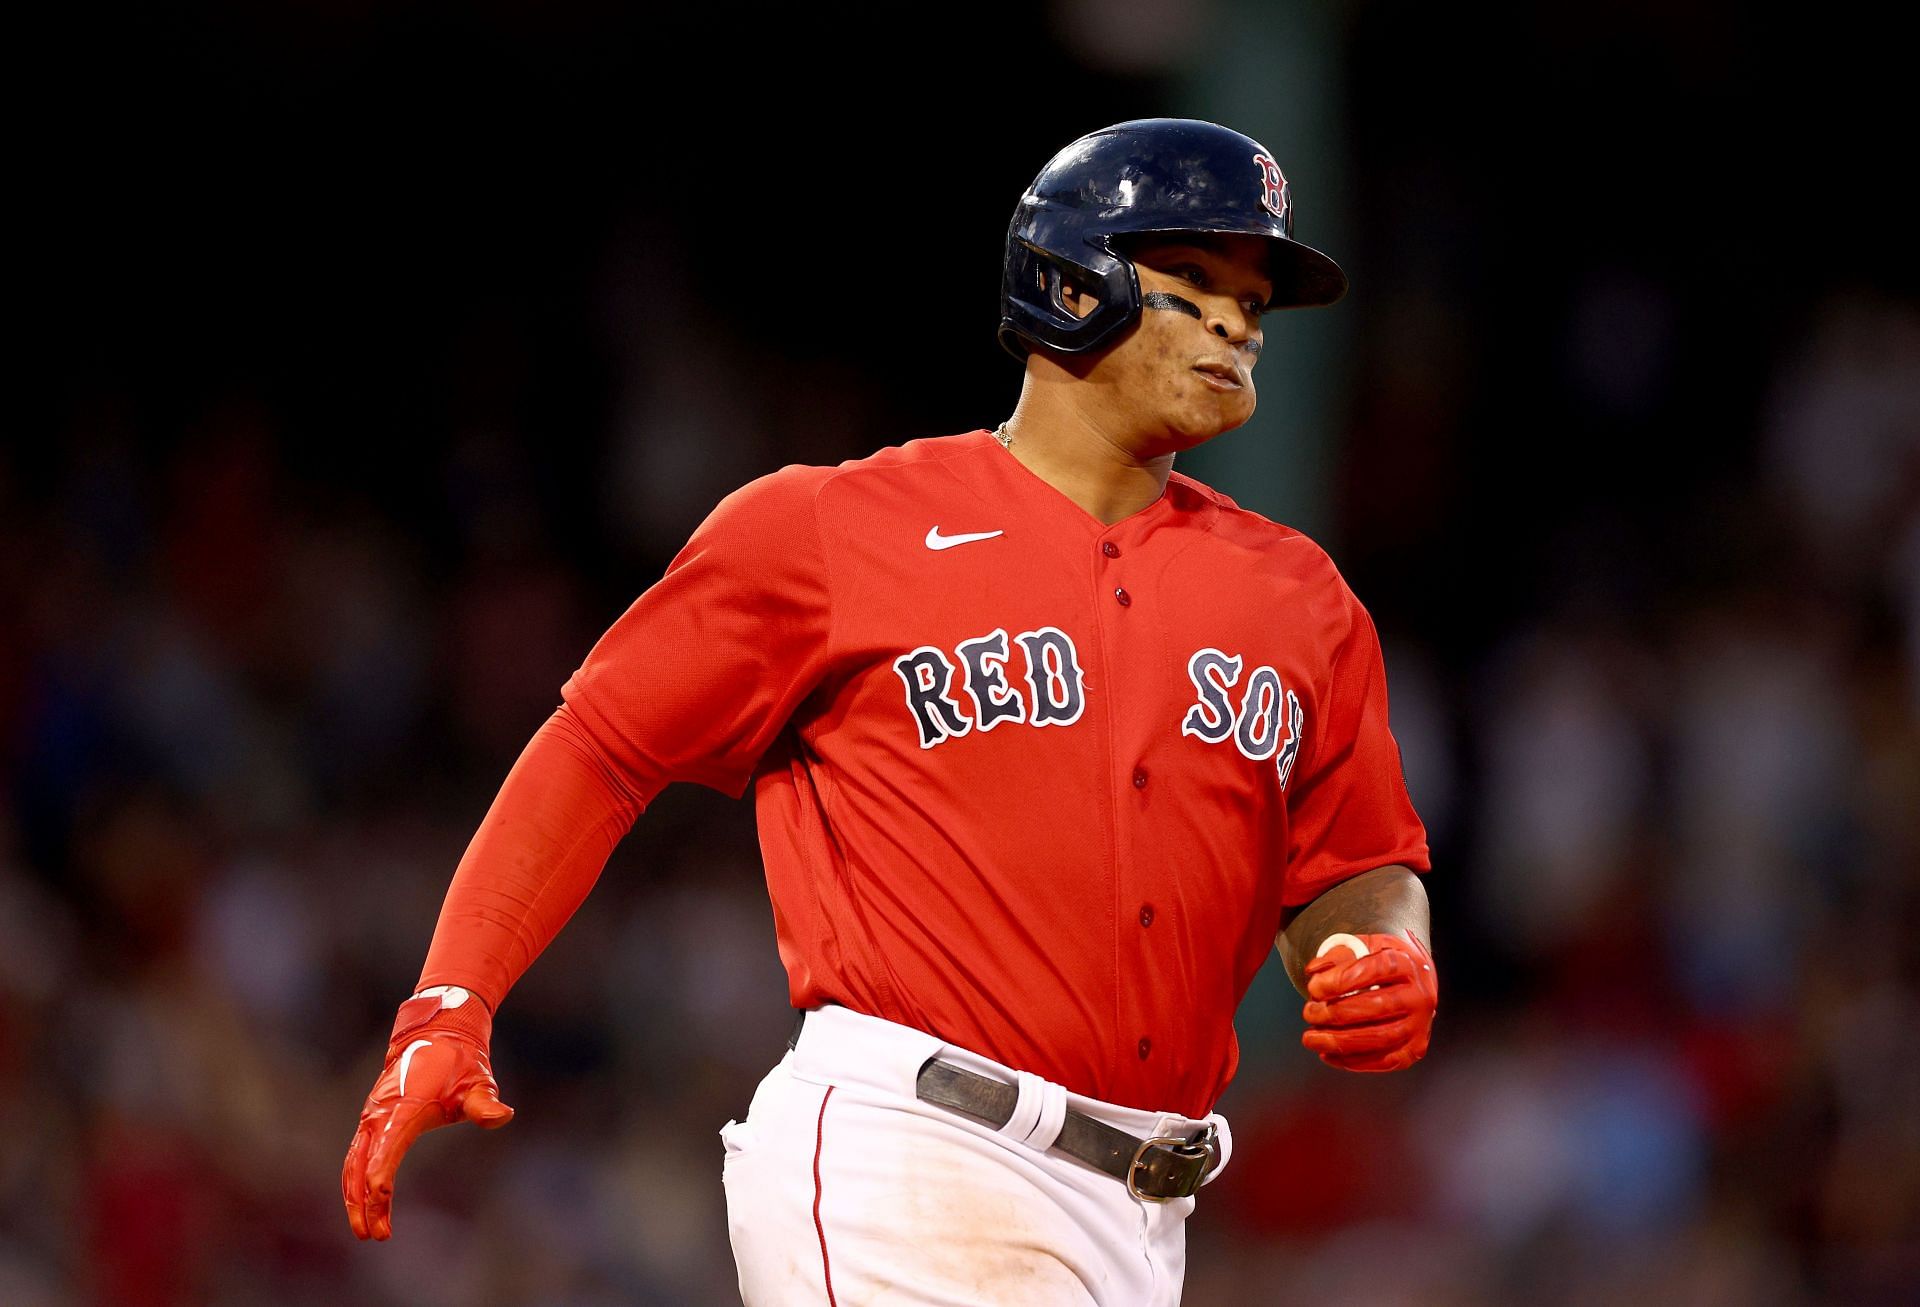 Rafael Devers of the Boston Red Sox has the third-best batting average in all of baseball with .326.